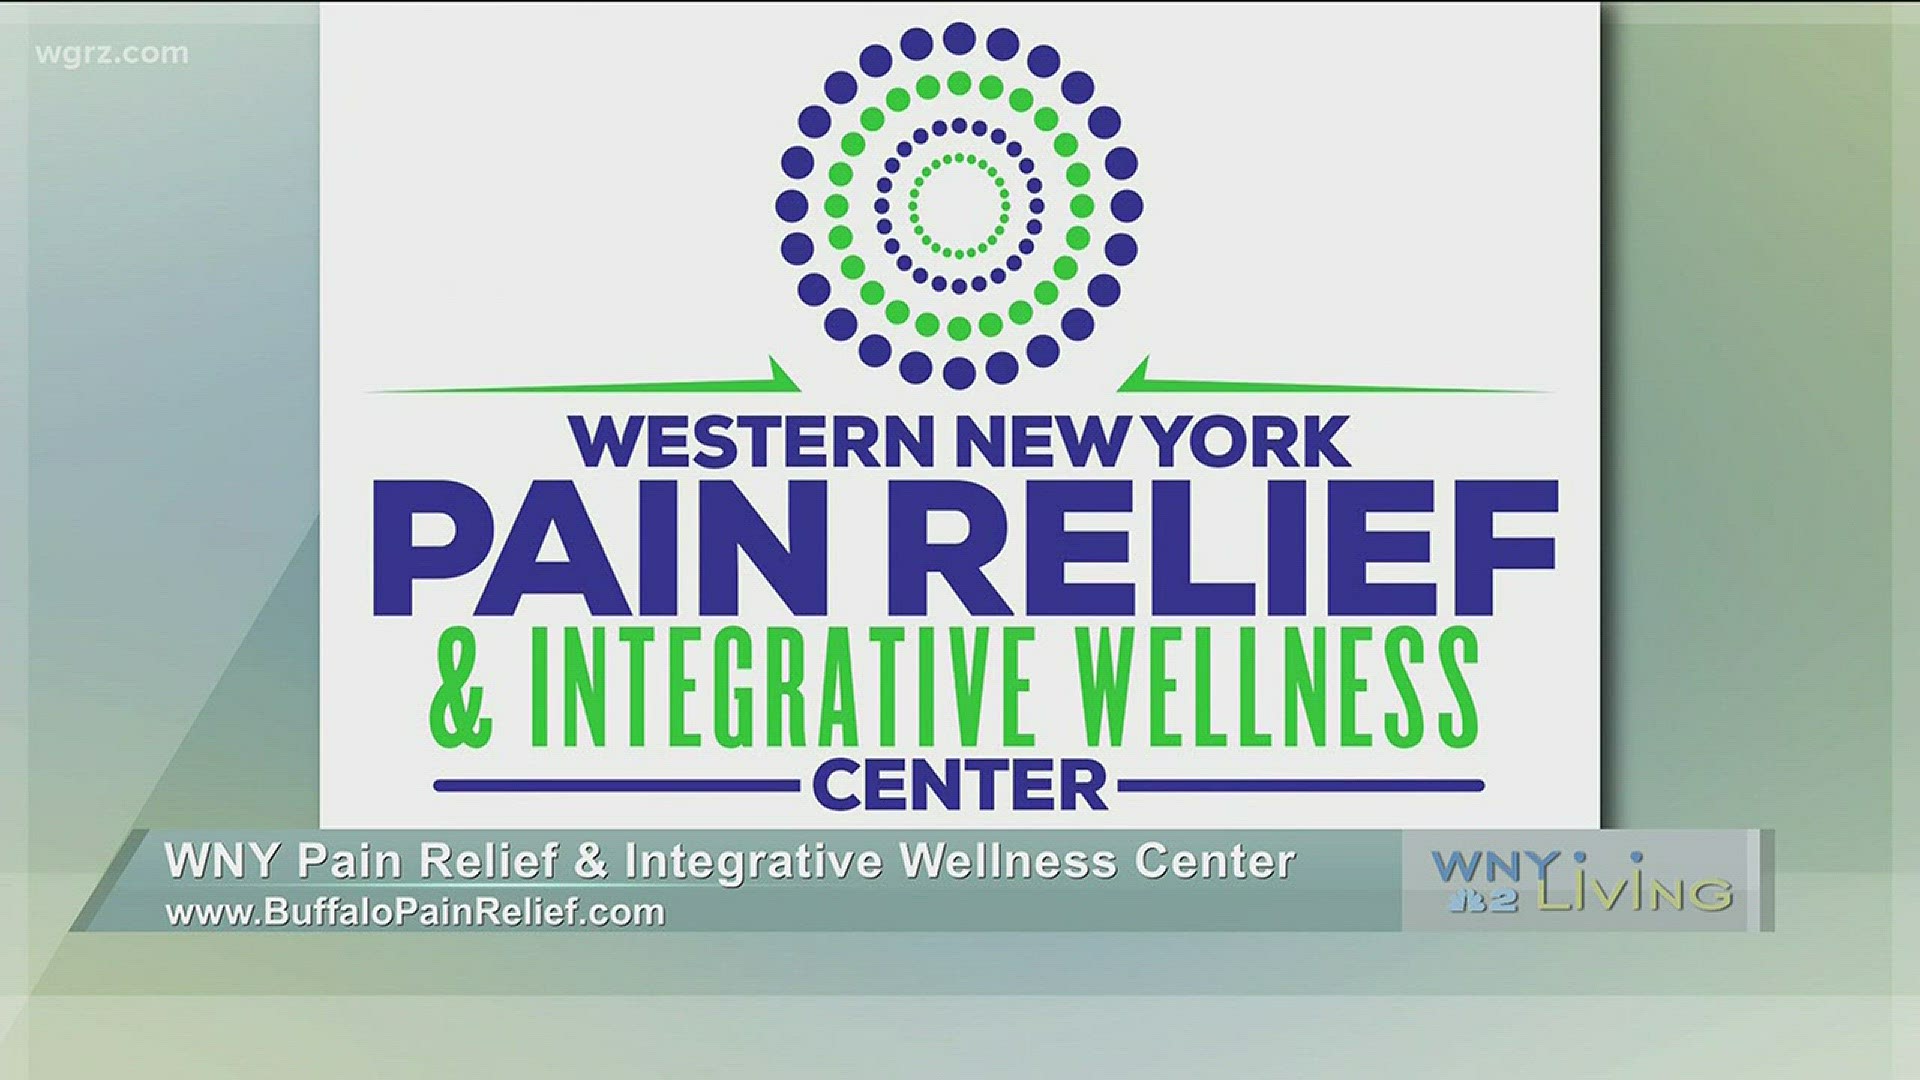 WNY Living - August 6 - WECK WNY Pain Relief & Integrative Wellness Center